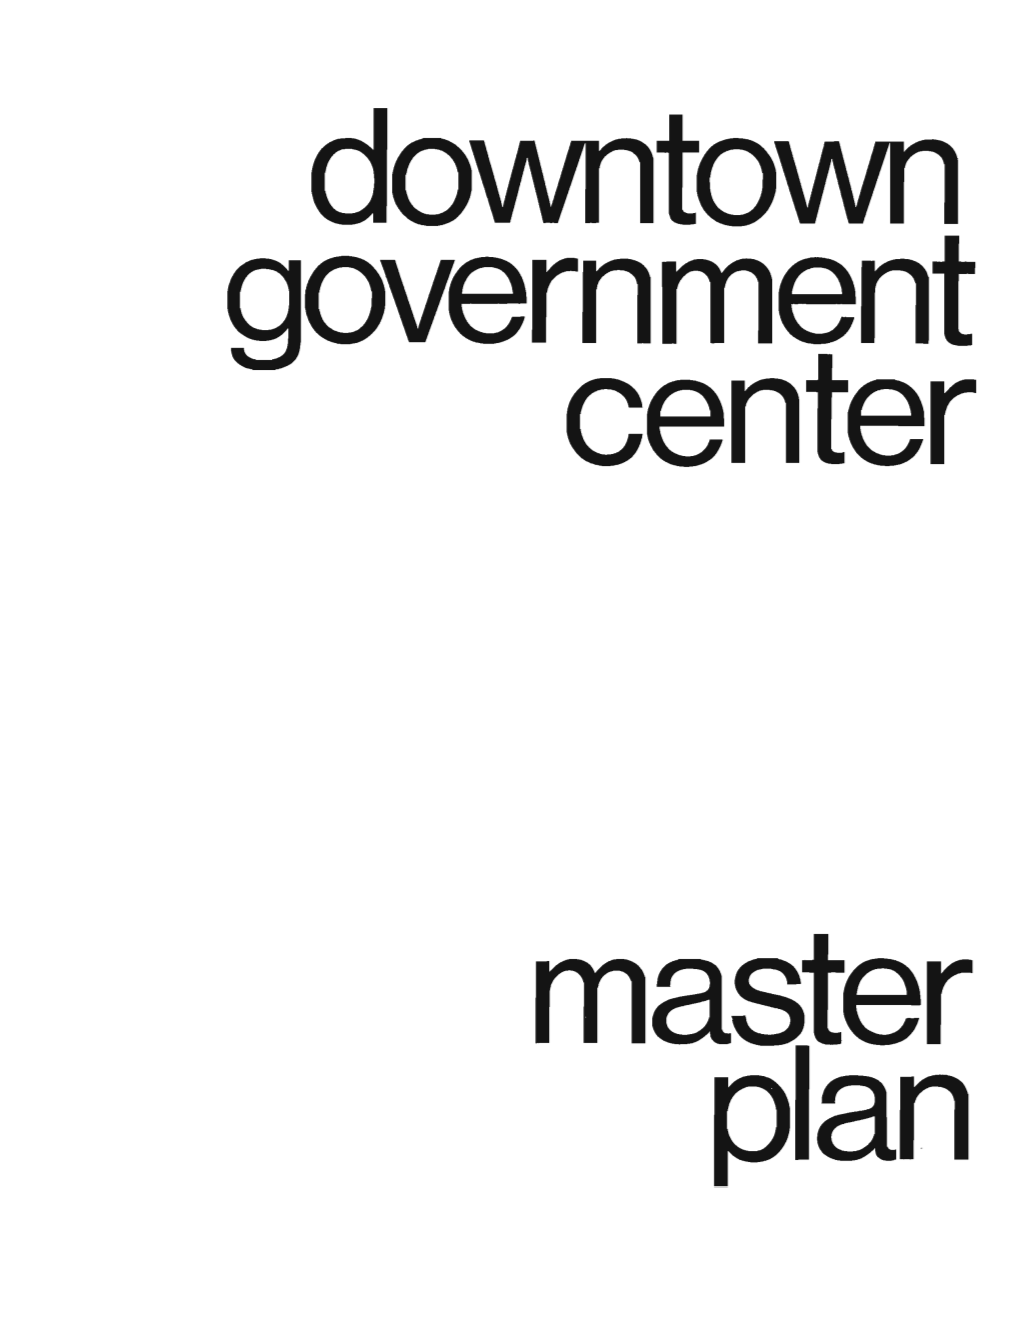 Downtown Government Center Master Plan, May 1976